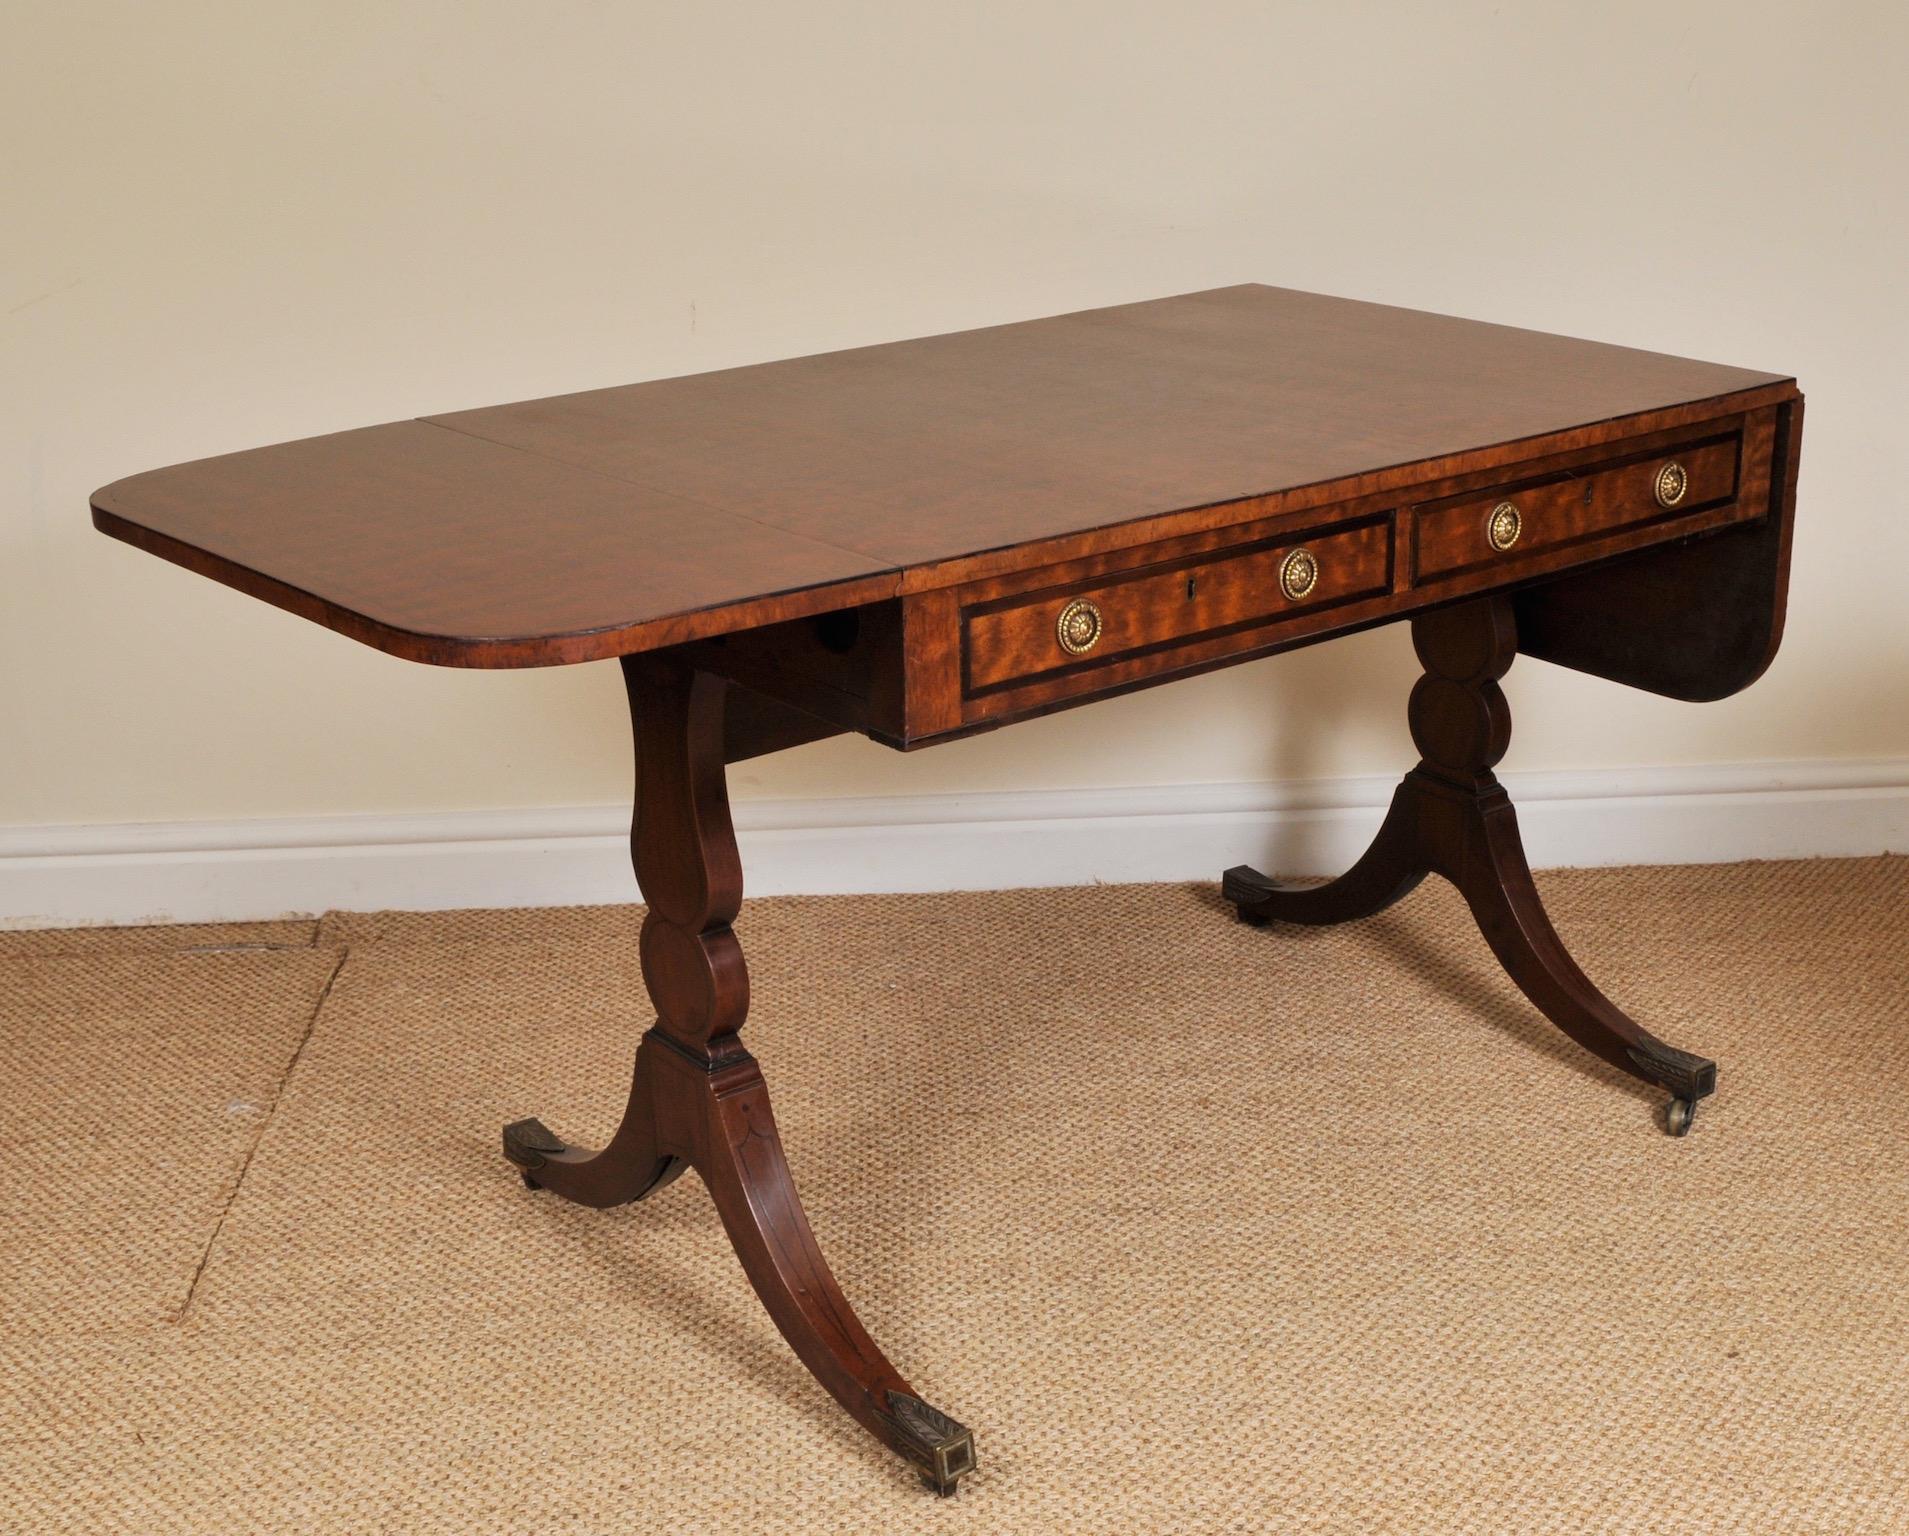 George III mahogany sofa table, circa 1785

A fine George III figured mahogany sofa table. The rectangular top has black ebony stringing. It has two drawers to the front and two dummy drawers to the rear with original brass handles. This table is